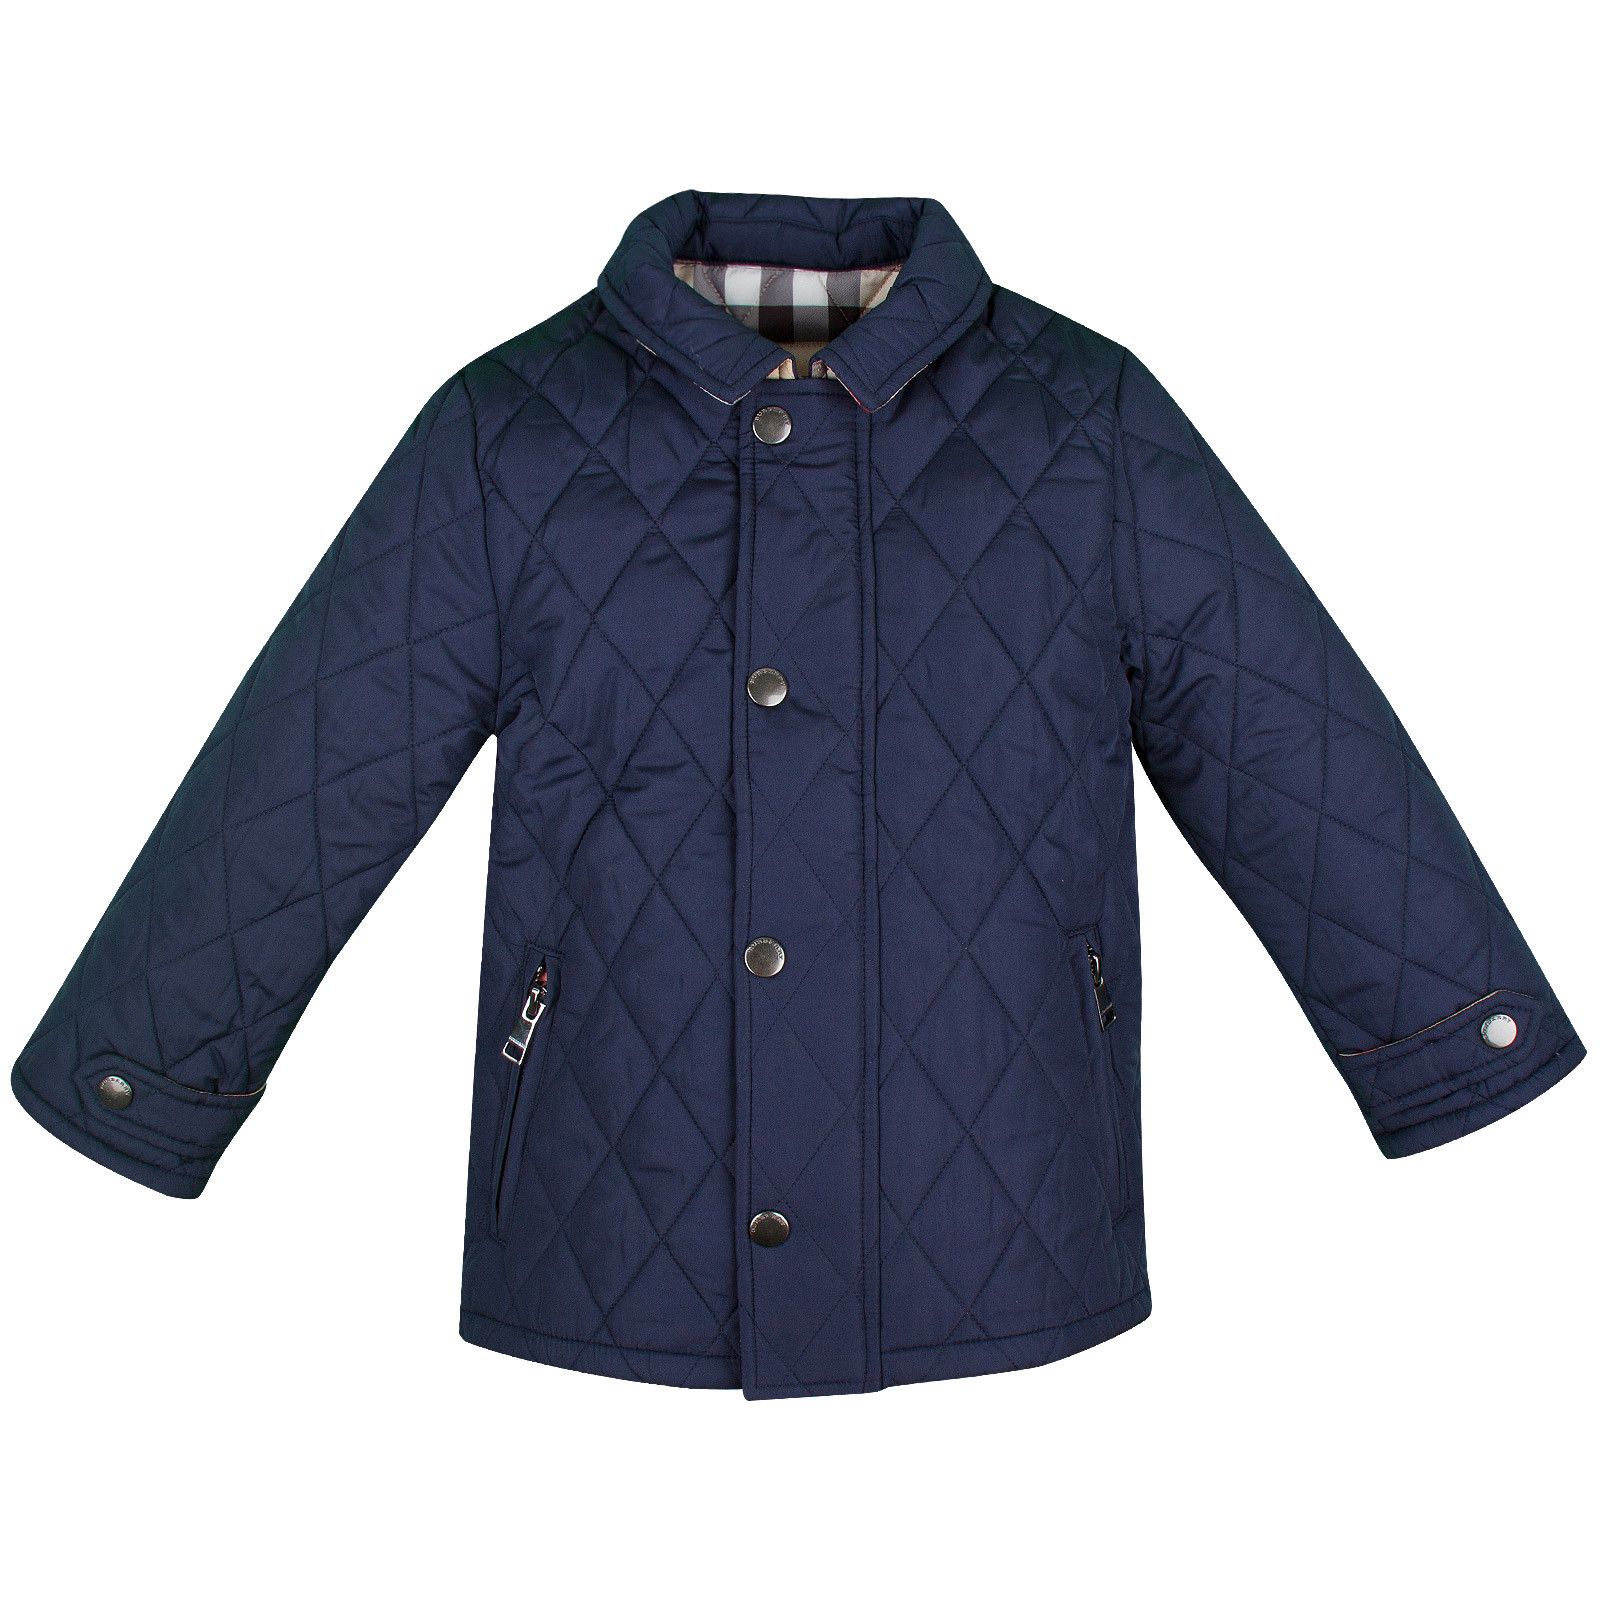 Boys Navy Blue Quilted Jacket With Classic Check Trims - CÉMAROSE | Children's Fashion Store - 1